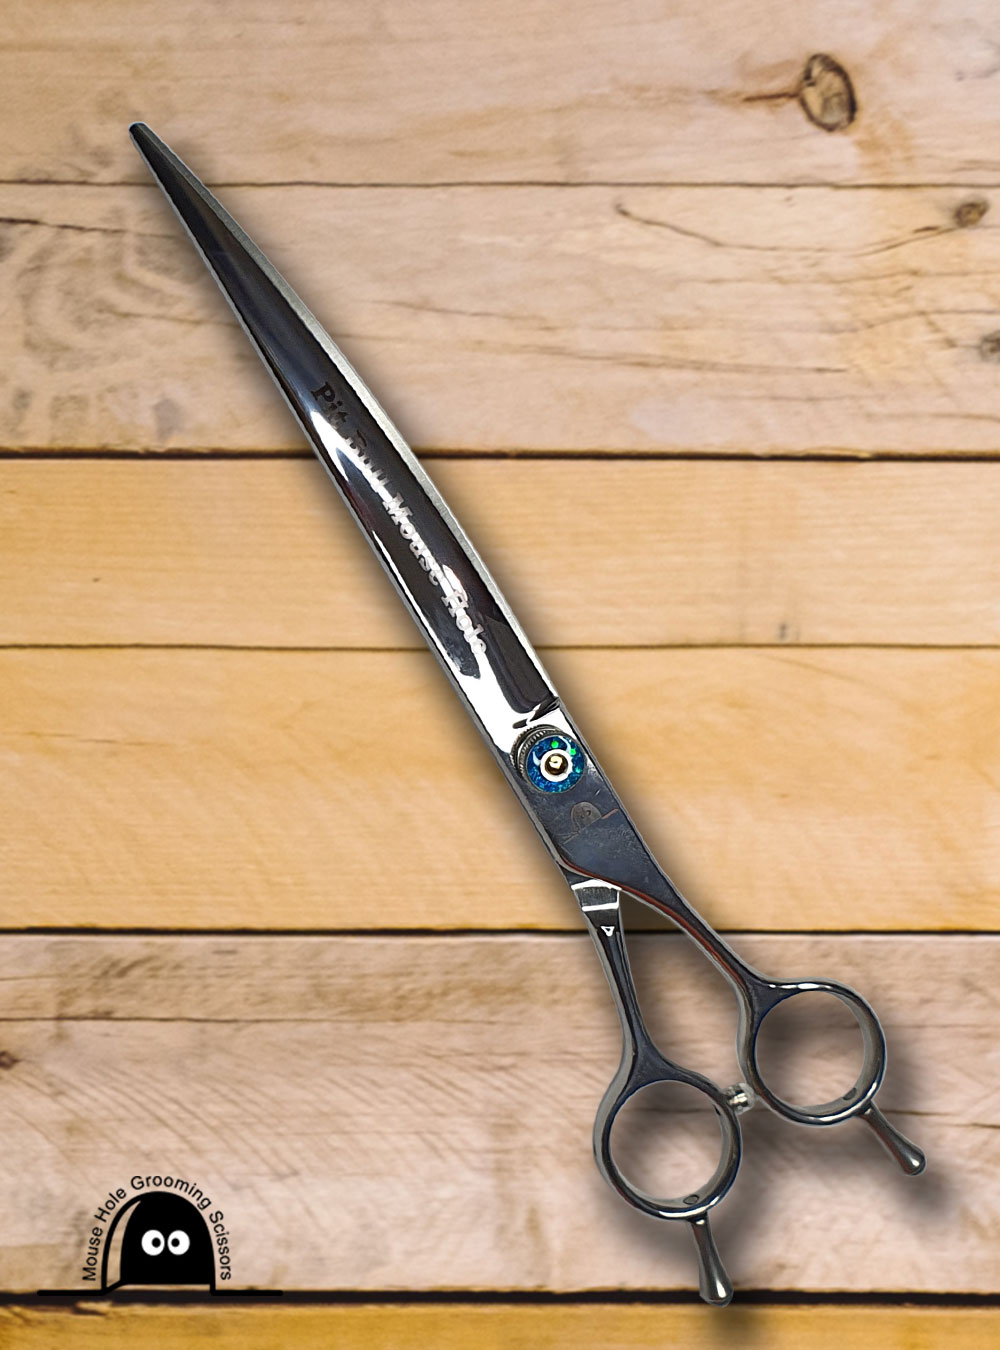 Pitbull Extreme Curved 8.5" Pet Grooming Scissors